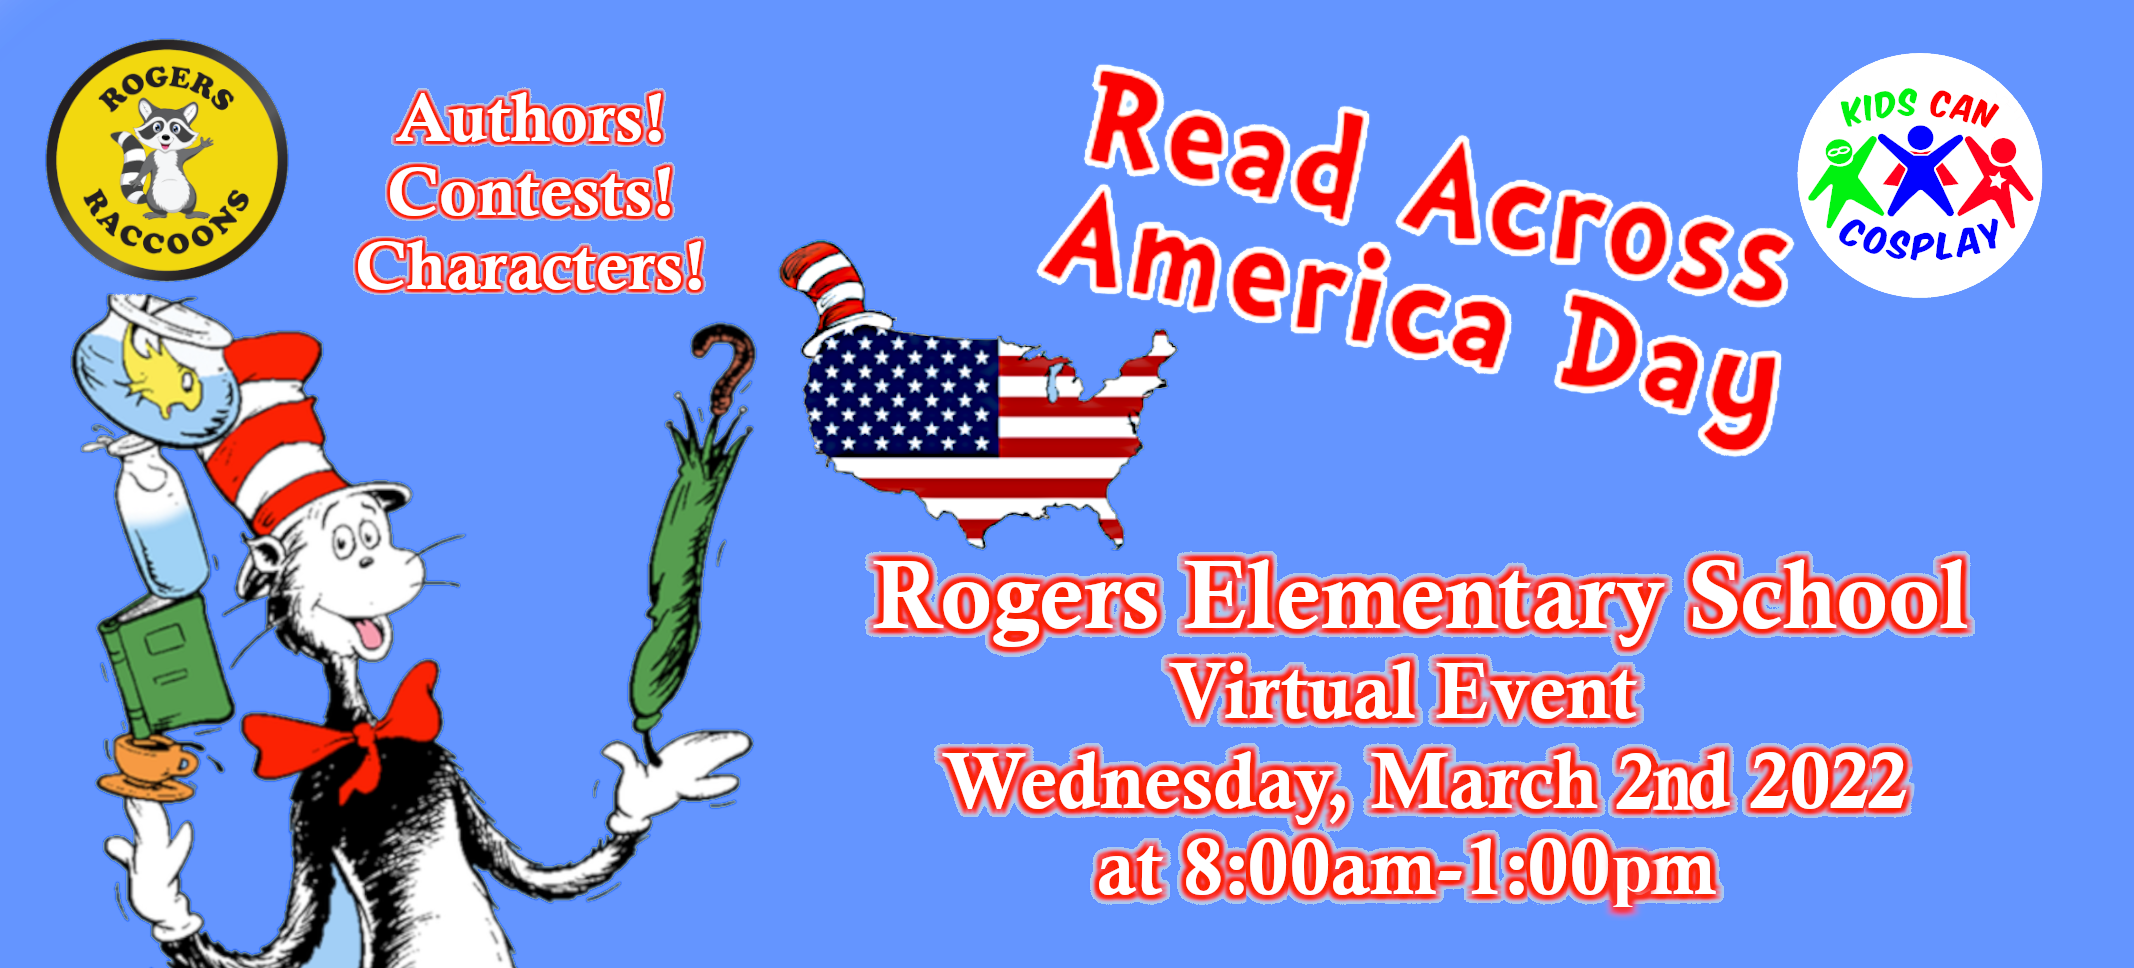 Read Across America Day 2022 Kids Can Cosplay